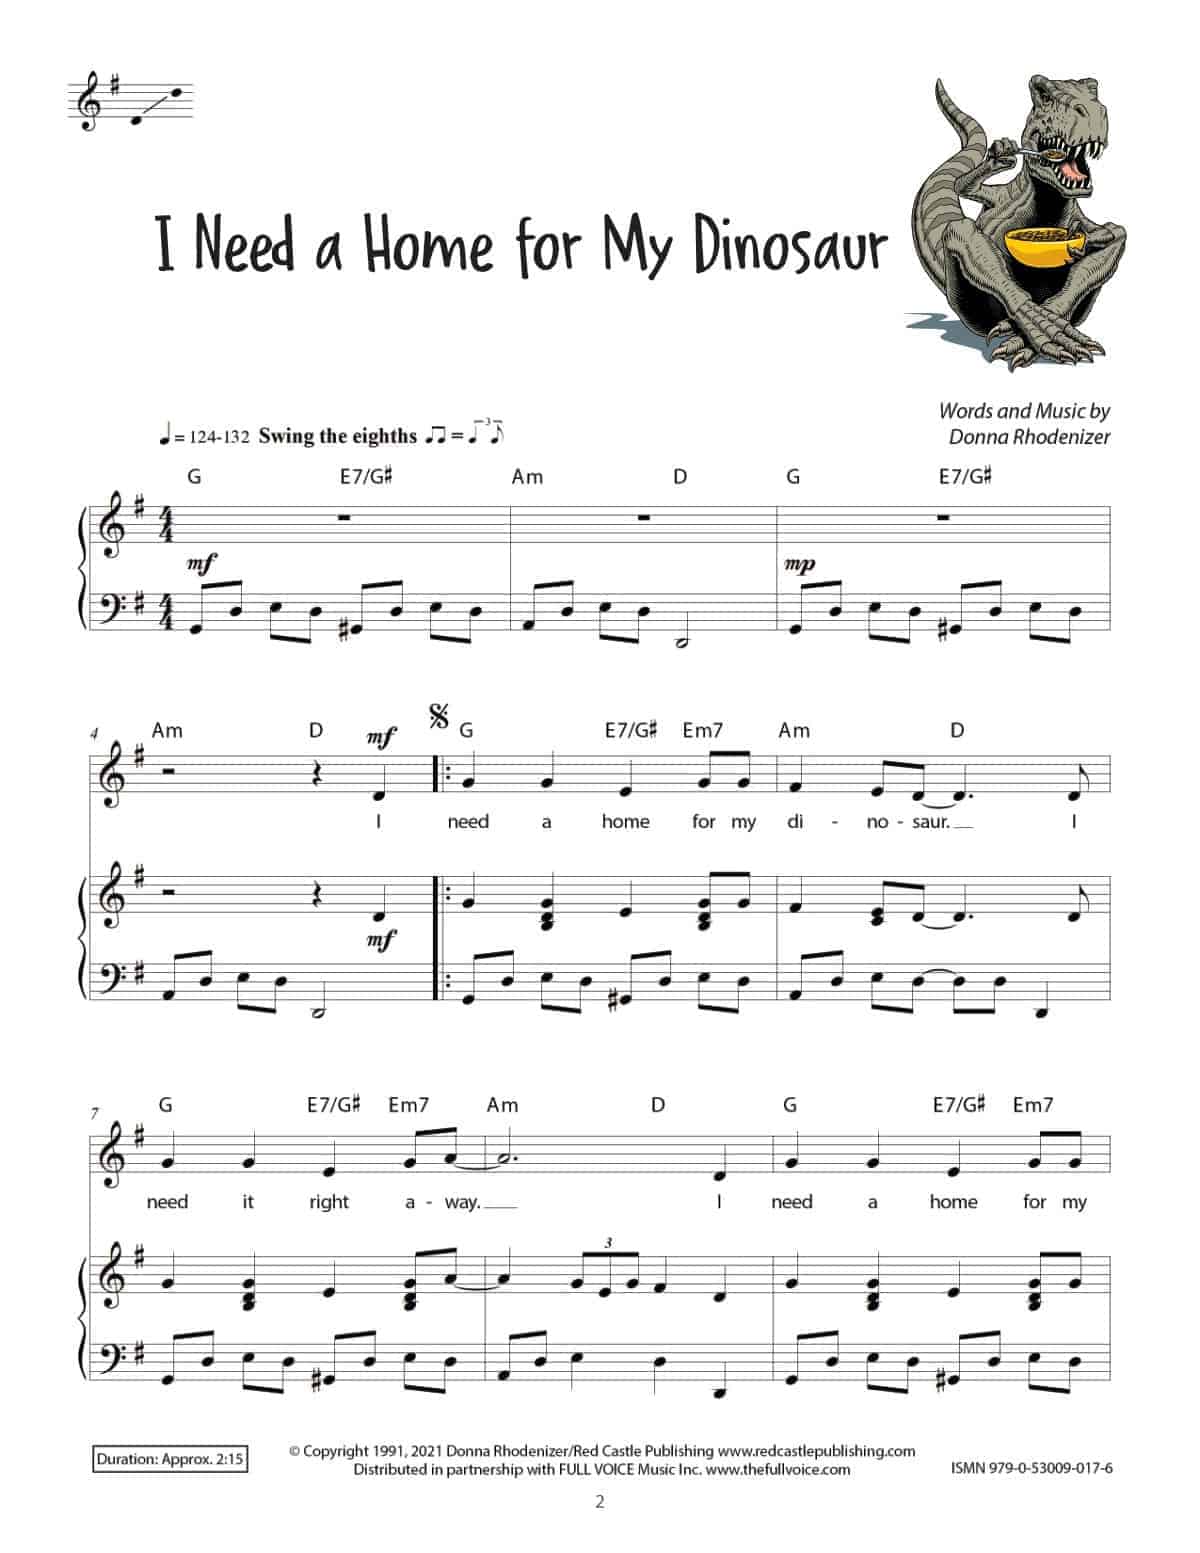 I Need a Home for My Dinosaur by Donna Rhodenizer